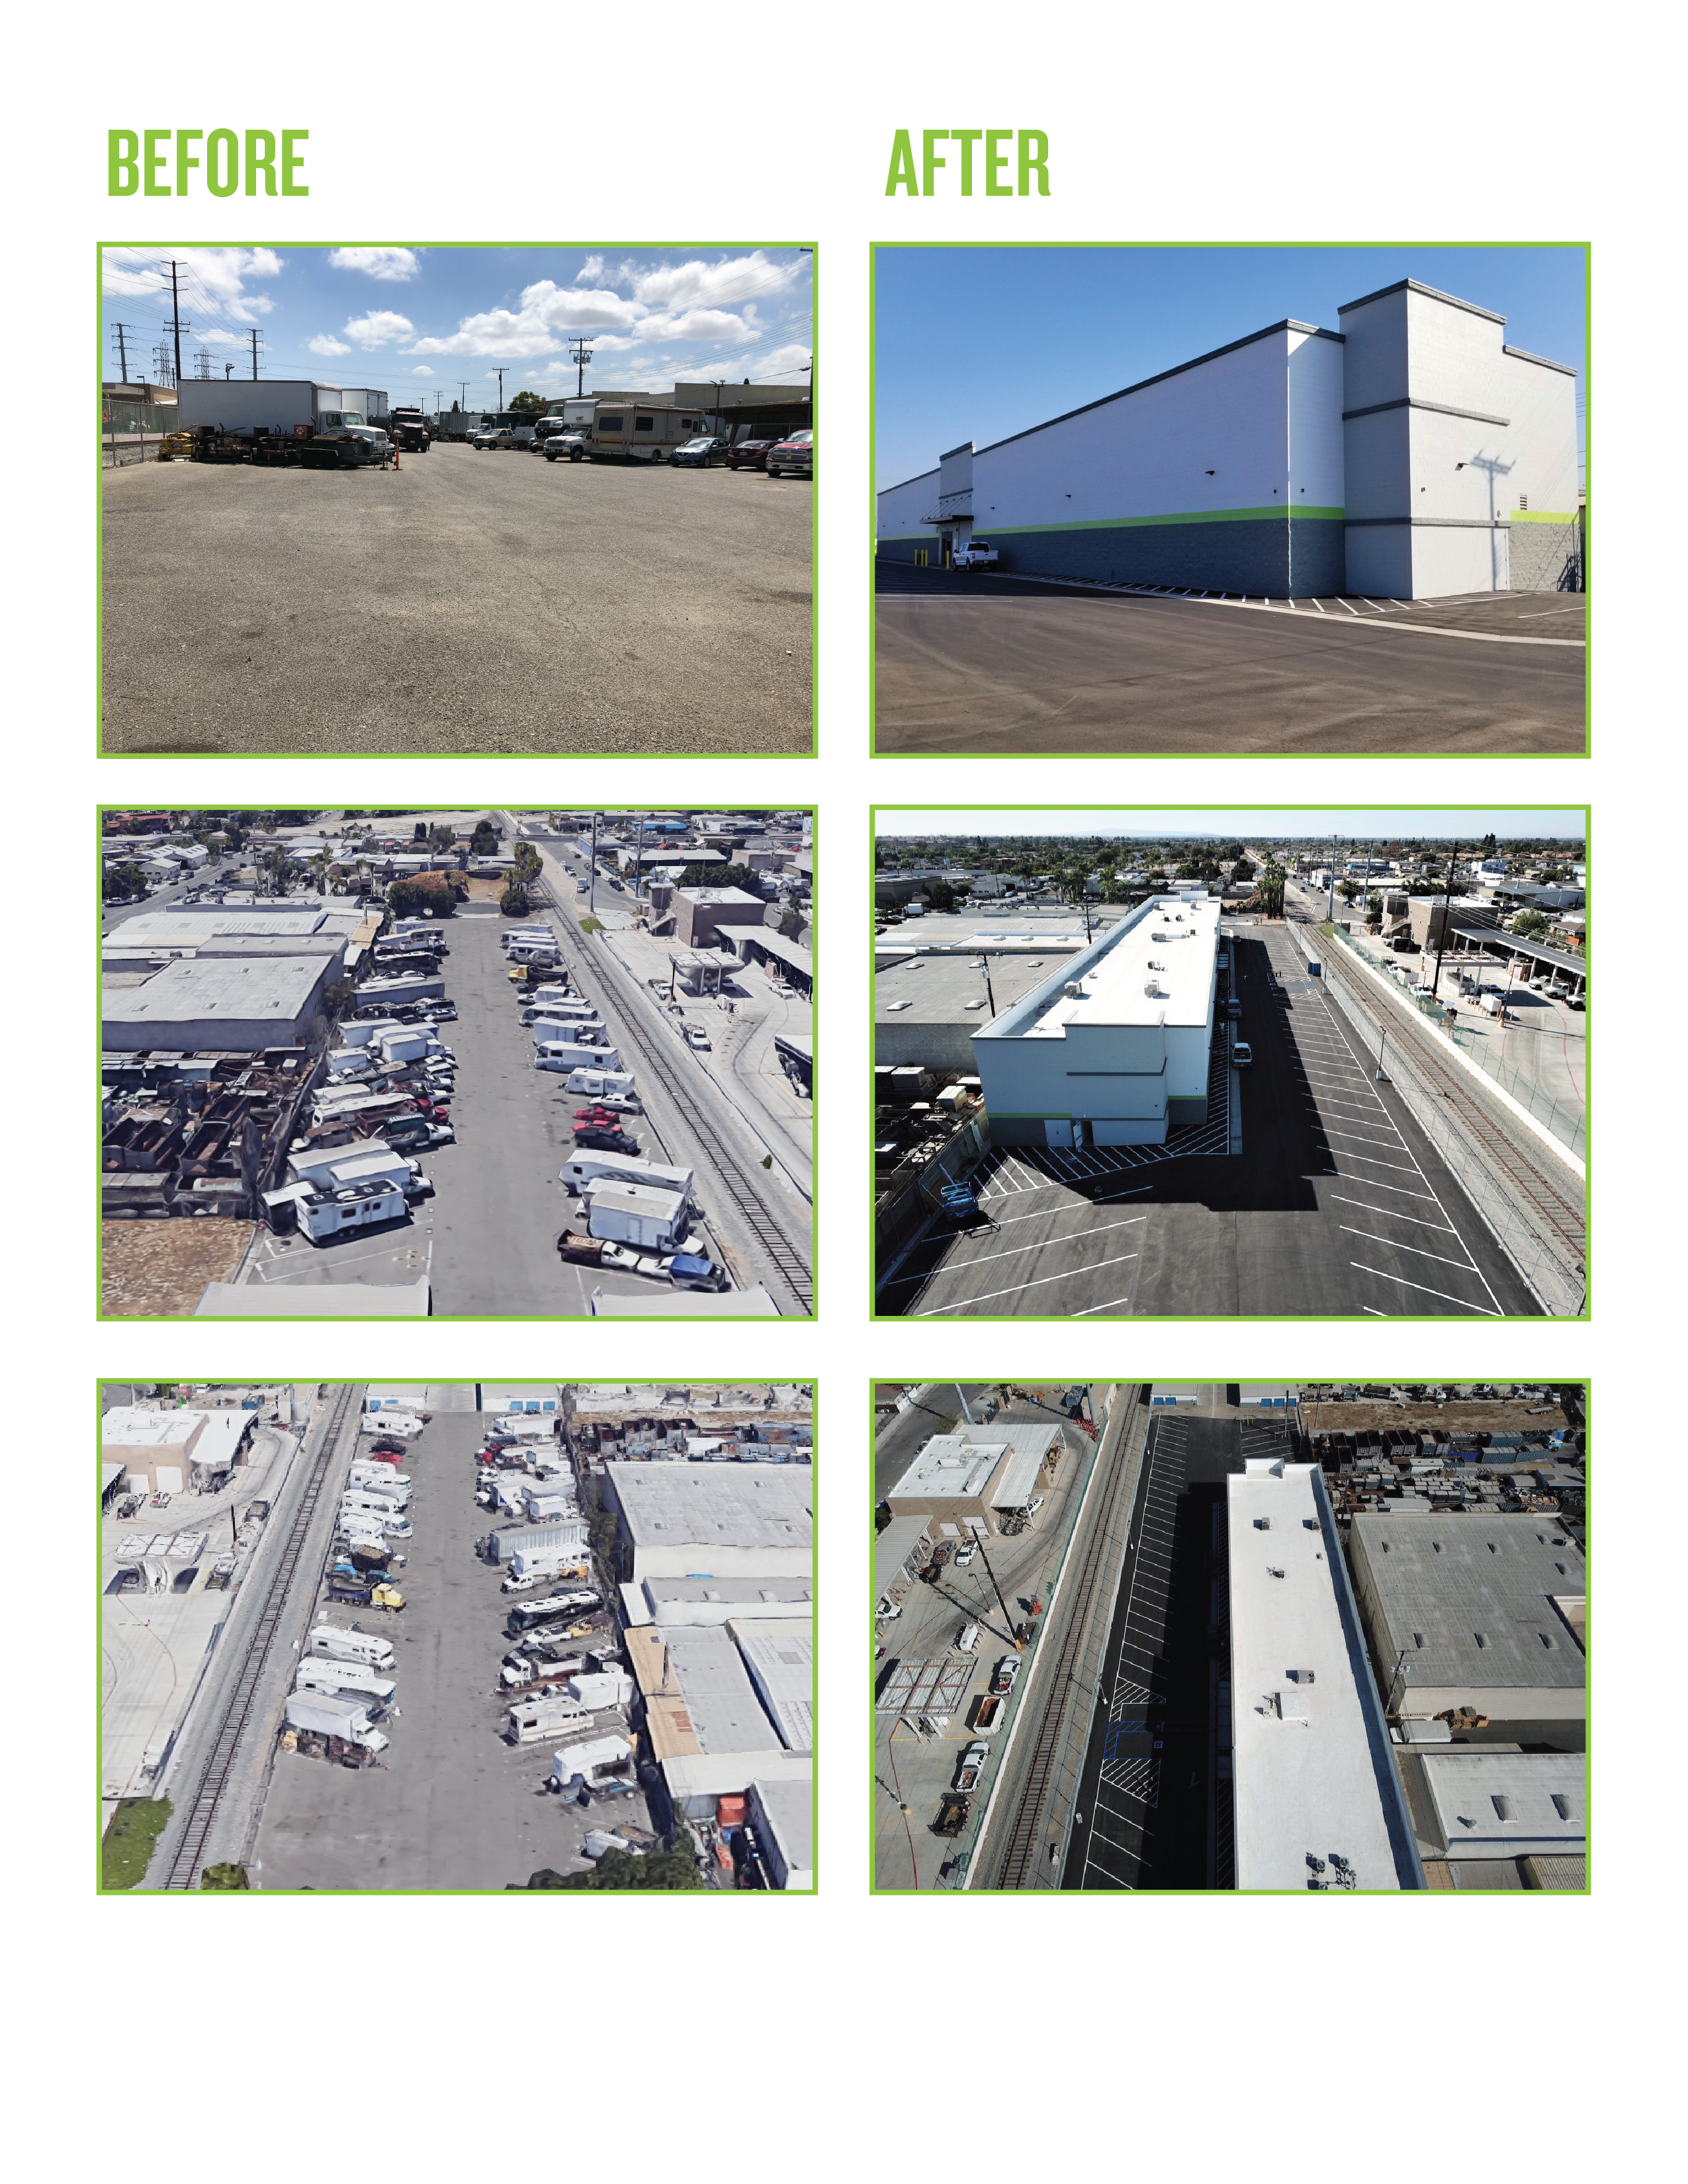 Before and After Photo of Self Storage Expansion Project